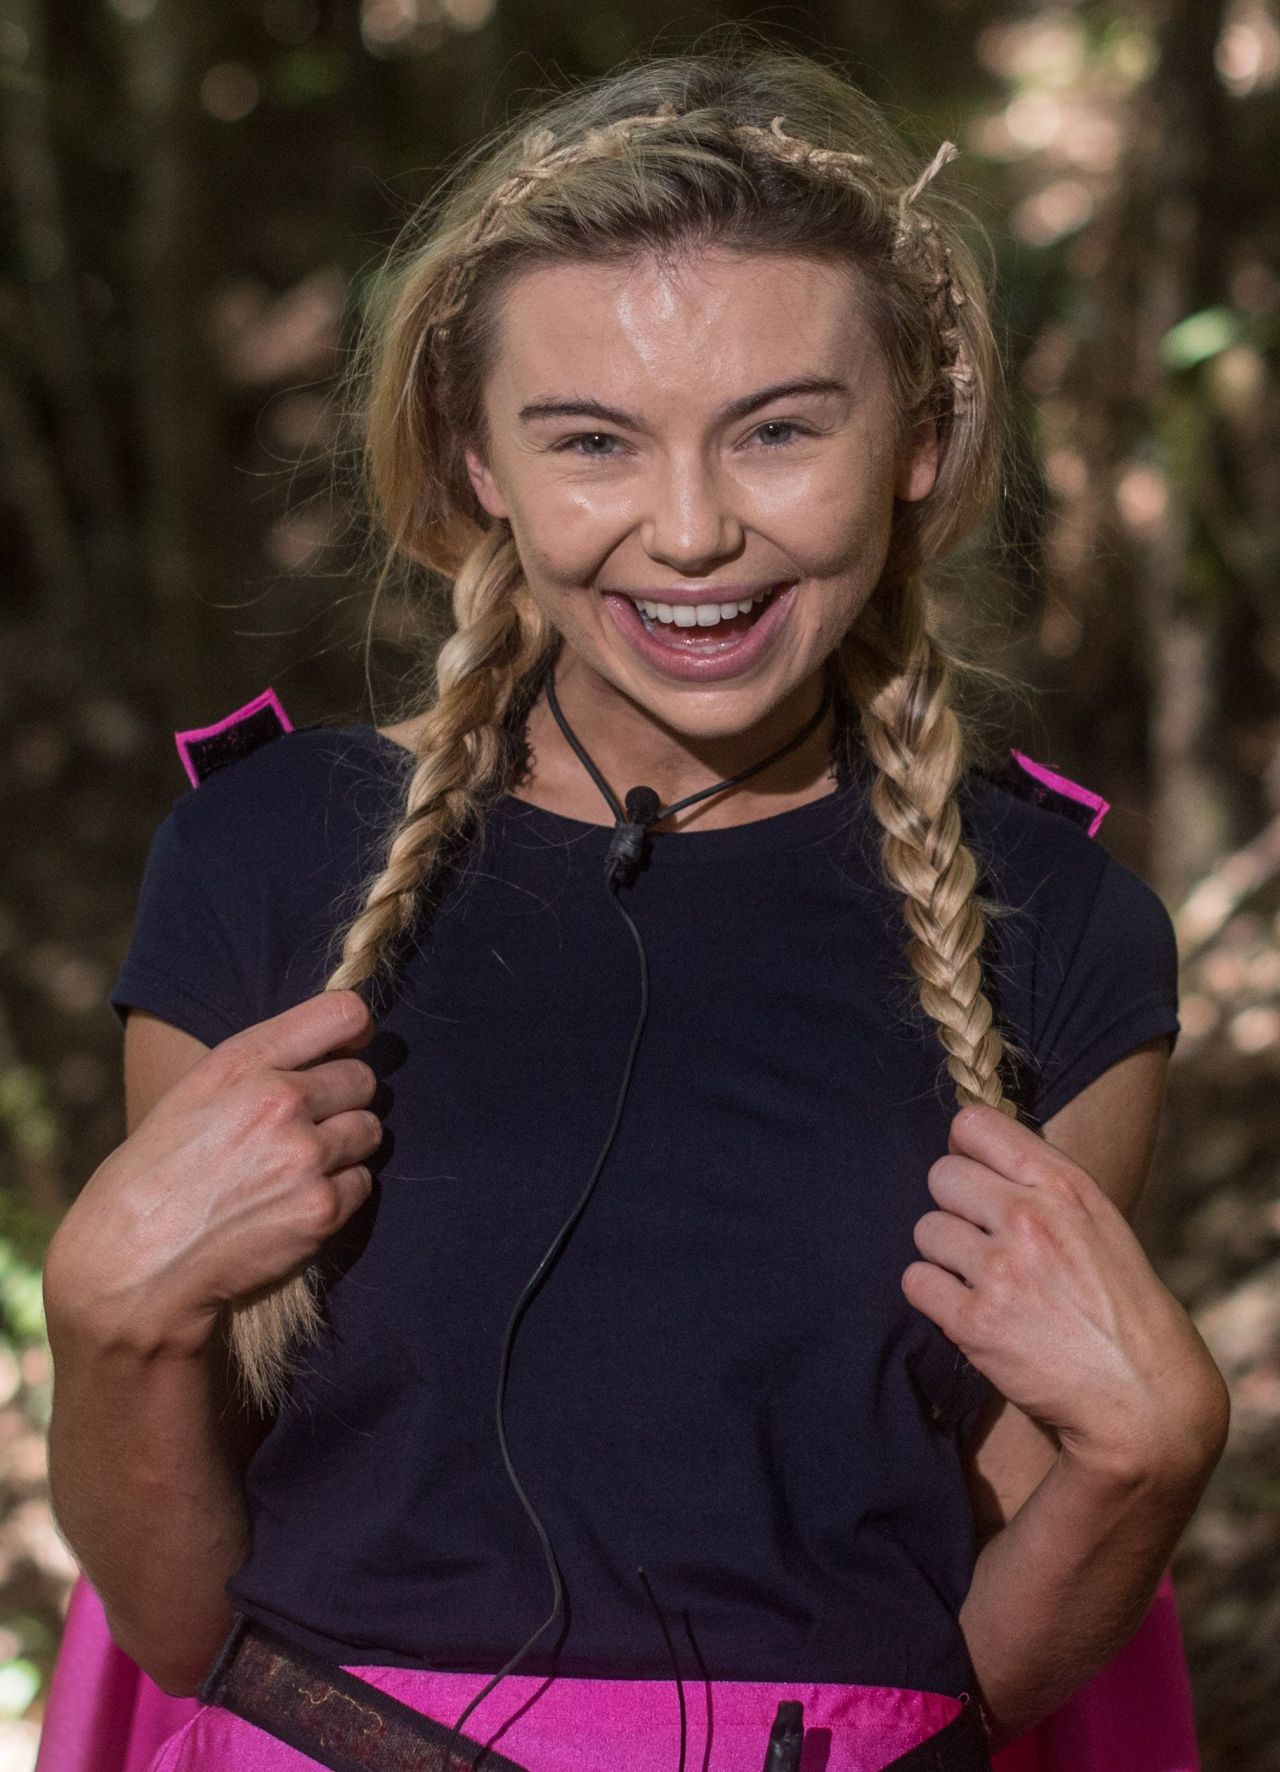 Georgia Toffolo Wins "I'm a Celebrity Get Me Out of Here" 2017